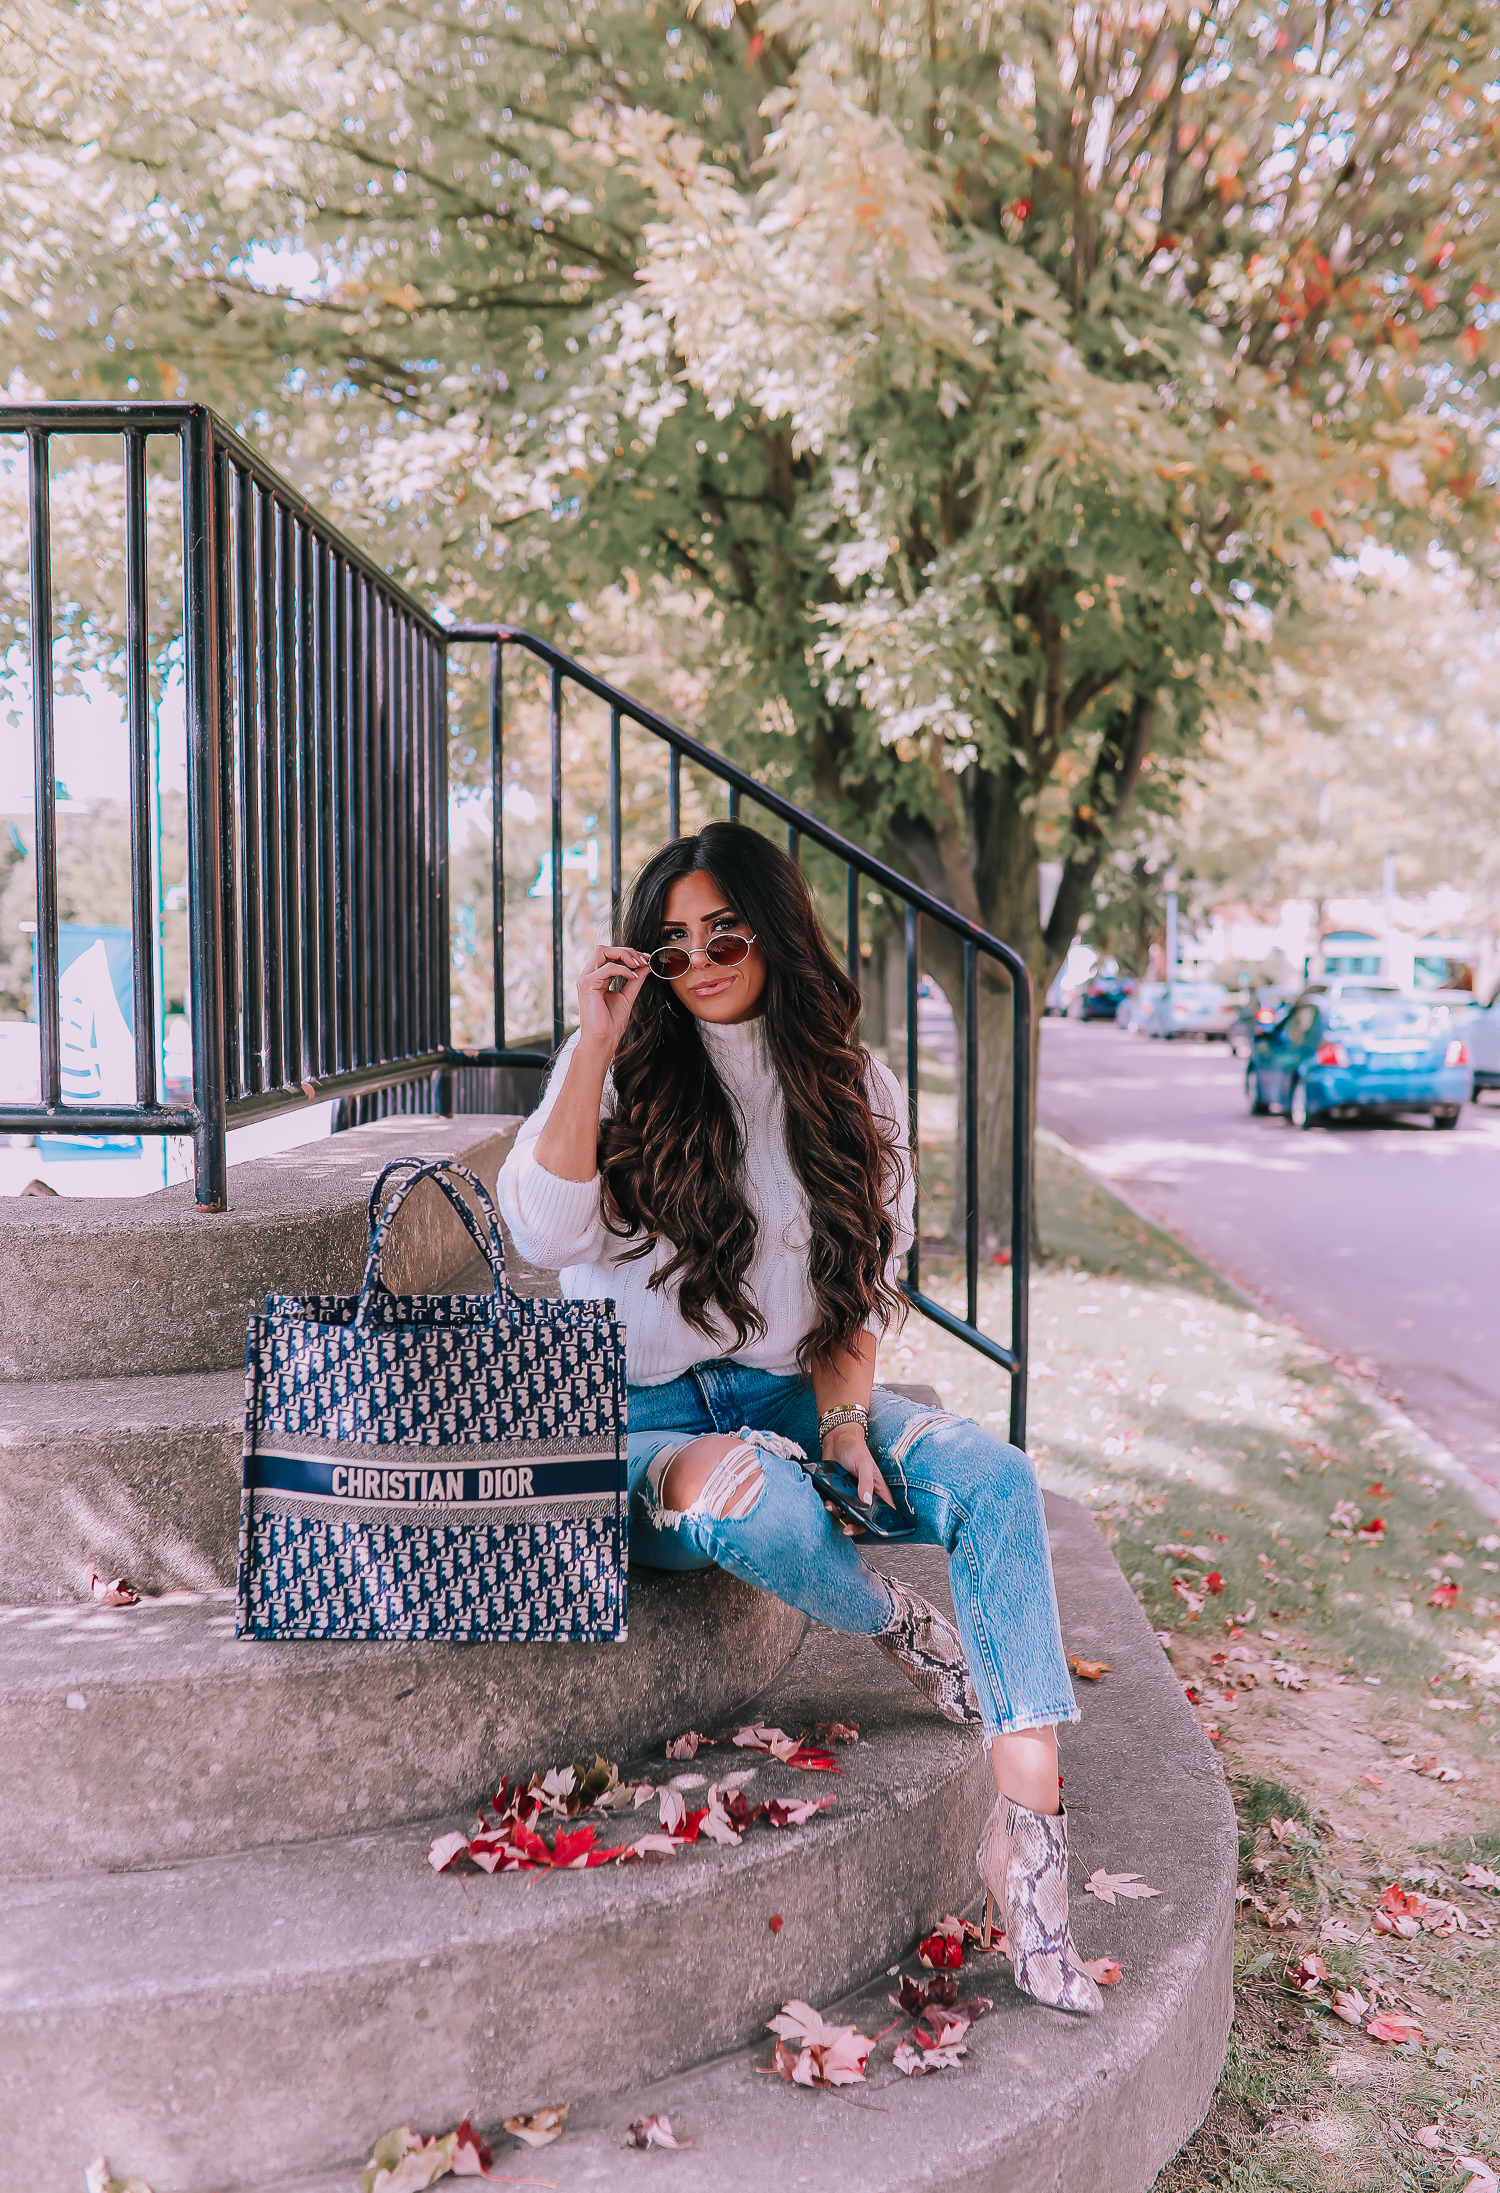 fall fashion outfits pinterest 2019, abercrombie mom jeans, Christian Dior book tote oblique navy, emily ann gemma, jessica simpson snake booties-2